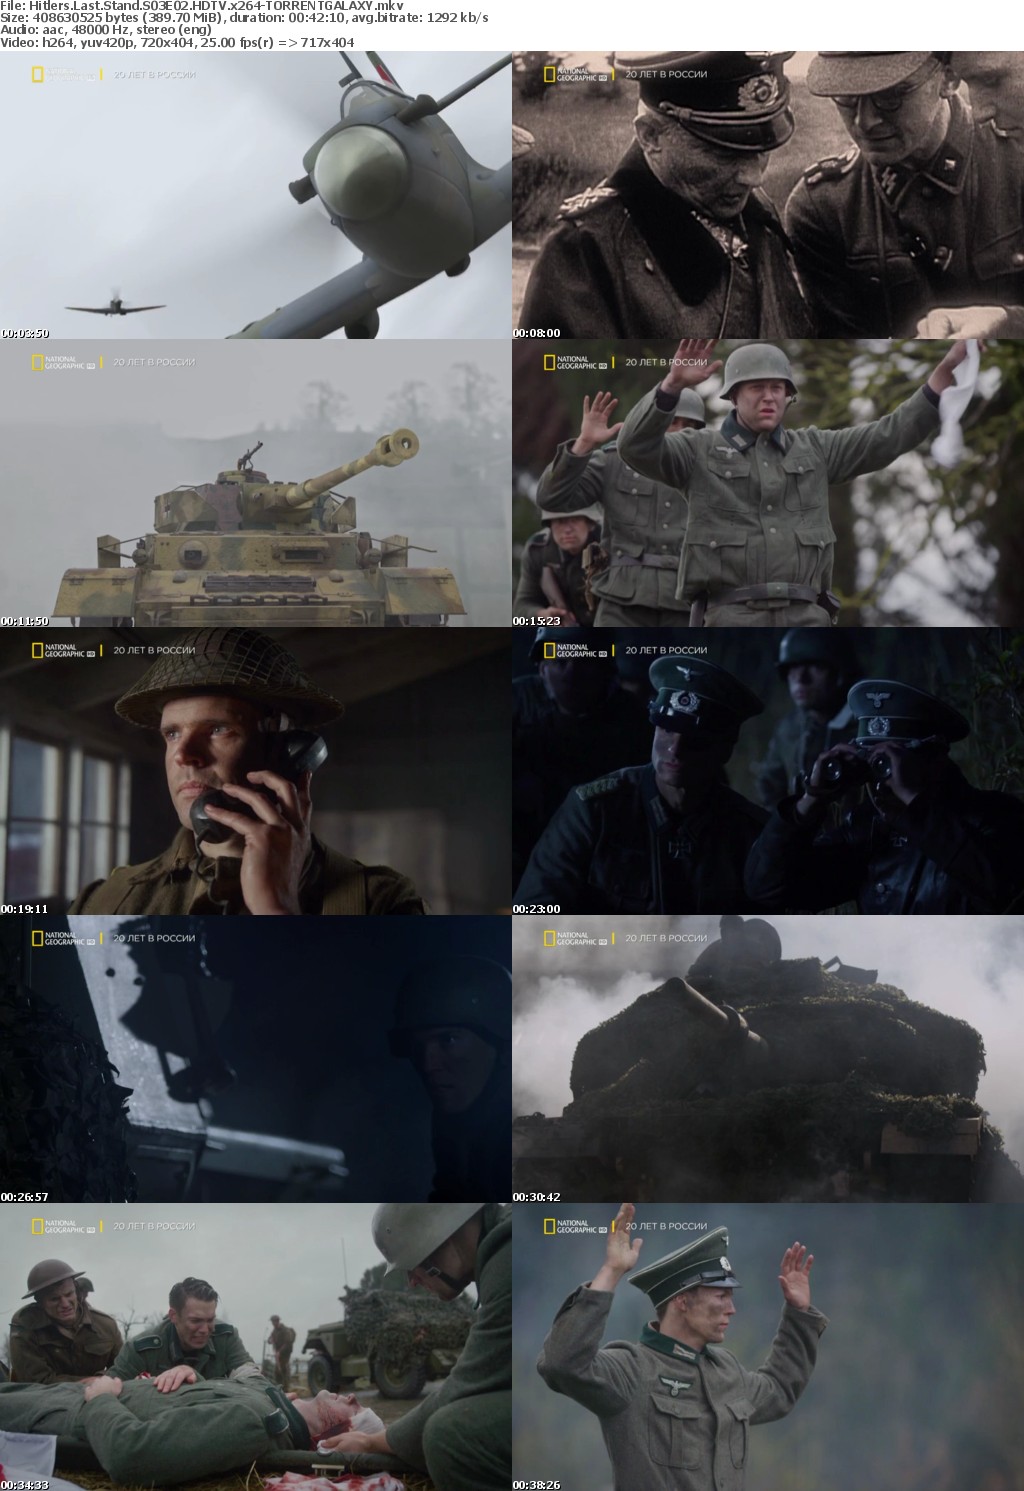 Hitlers Last Stand S03E02 HDTV x264-GALAXY